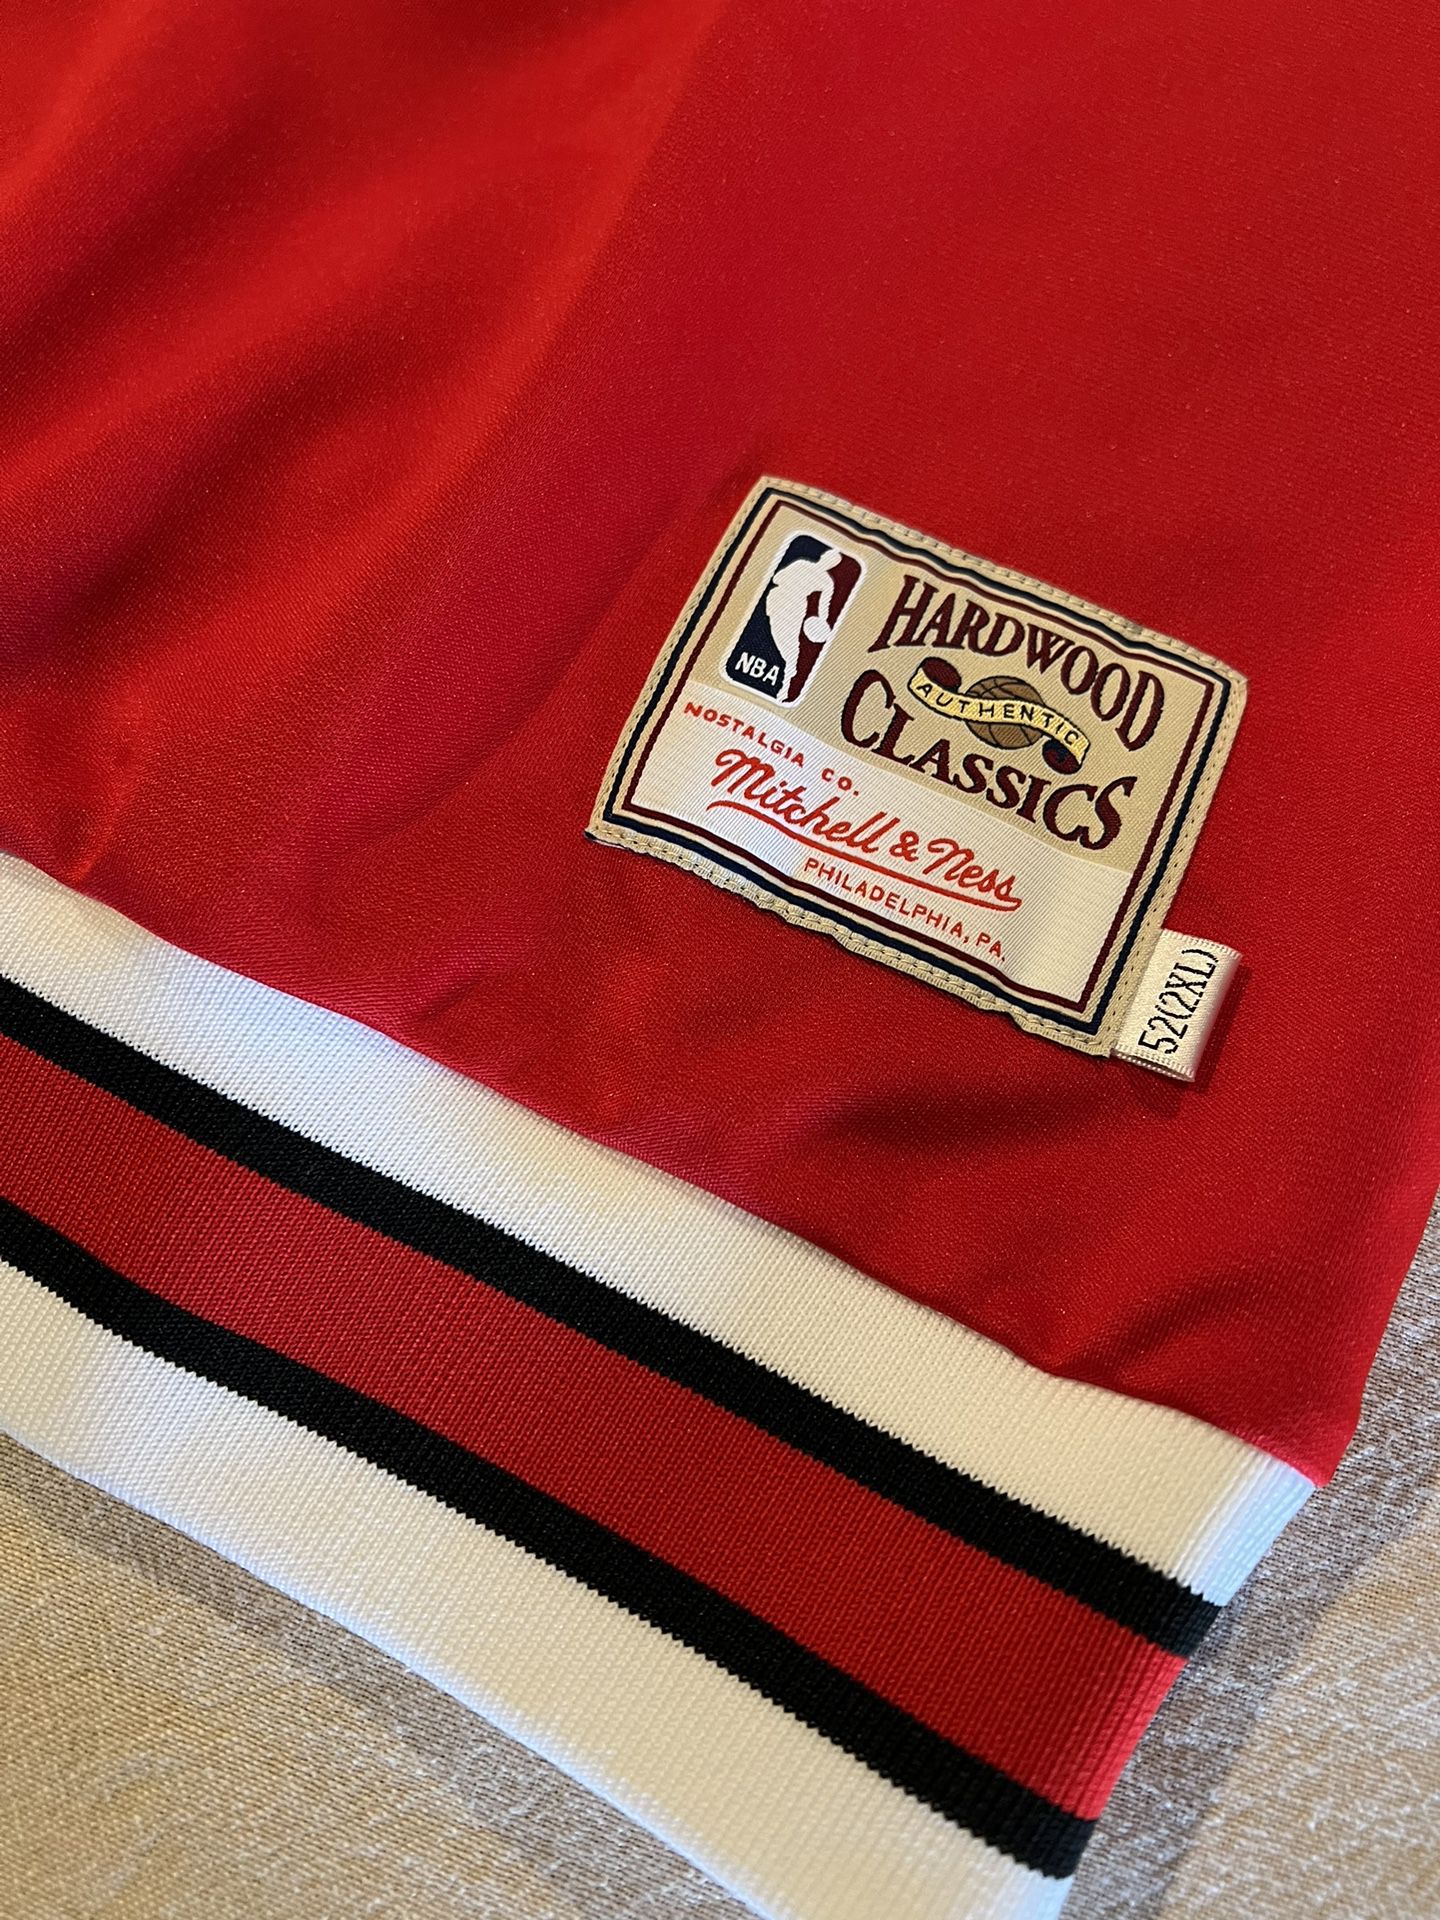 Nike Aeroswift NBA Chicago Bulls Plain Home Jersey for Sale in Anaheim, CA  - OfferUp